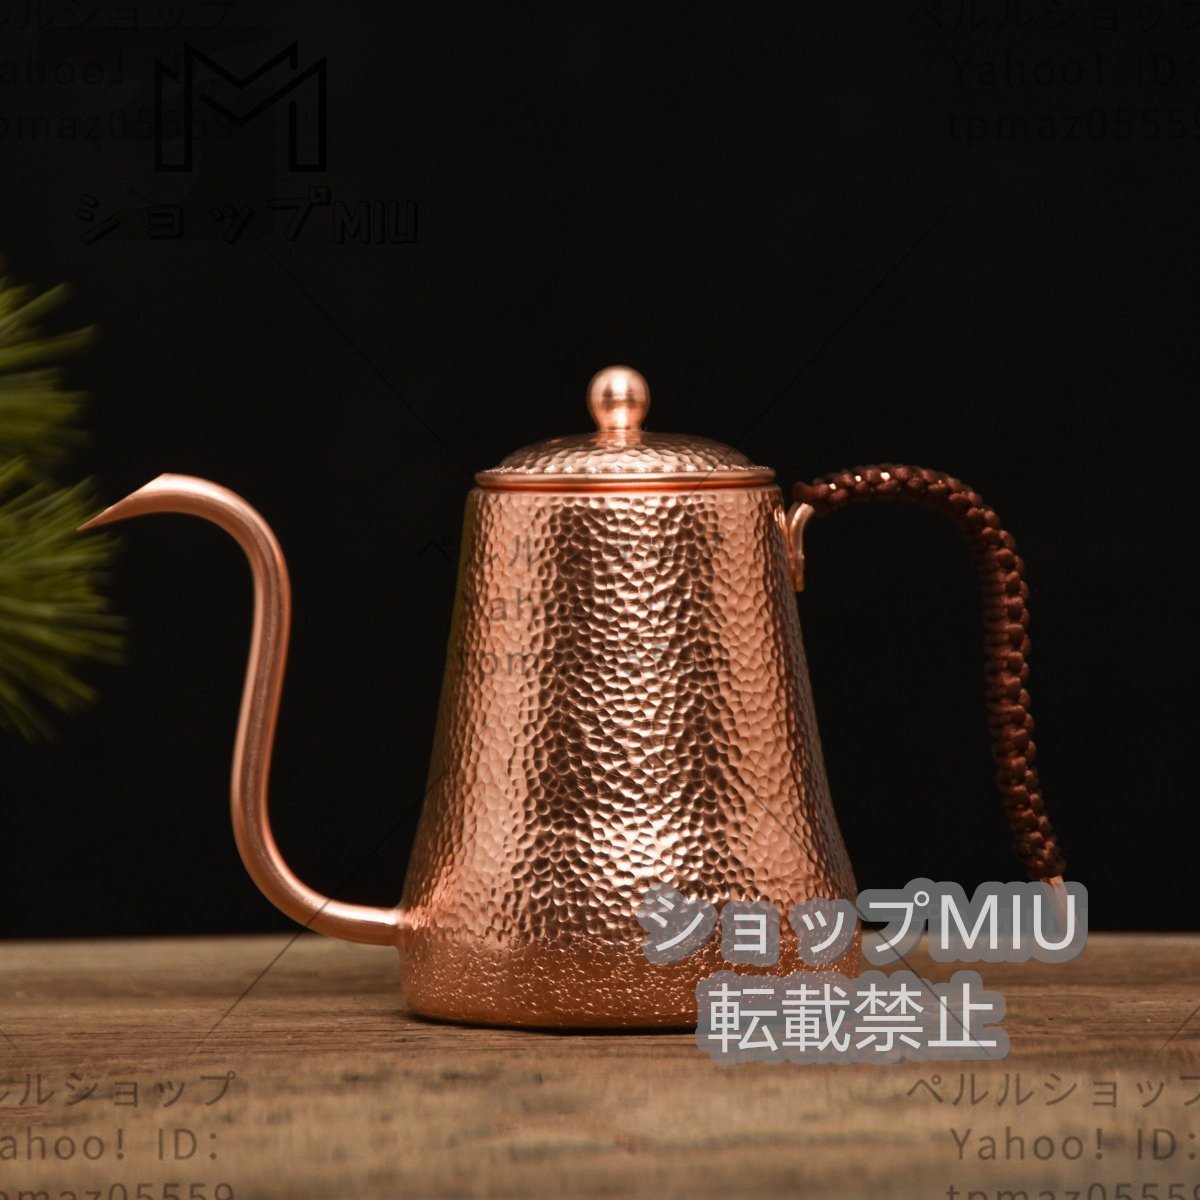 Coffee Drip Pot Coffee Kettle Handmade Narrow Mouth Pot Pure Copper 500ml Camping Coffee Utensil Narrow Mouth Type, tea utensils, Cup and saucer, Coffee cup